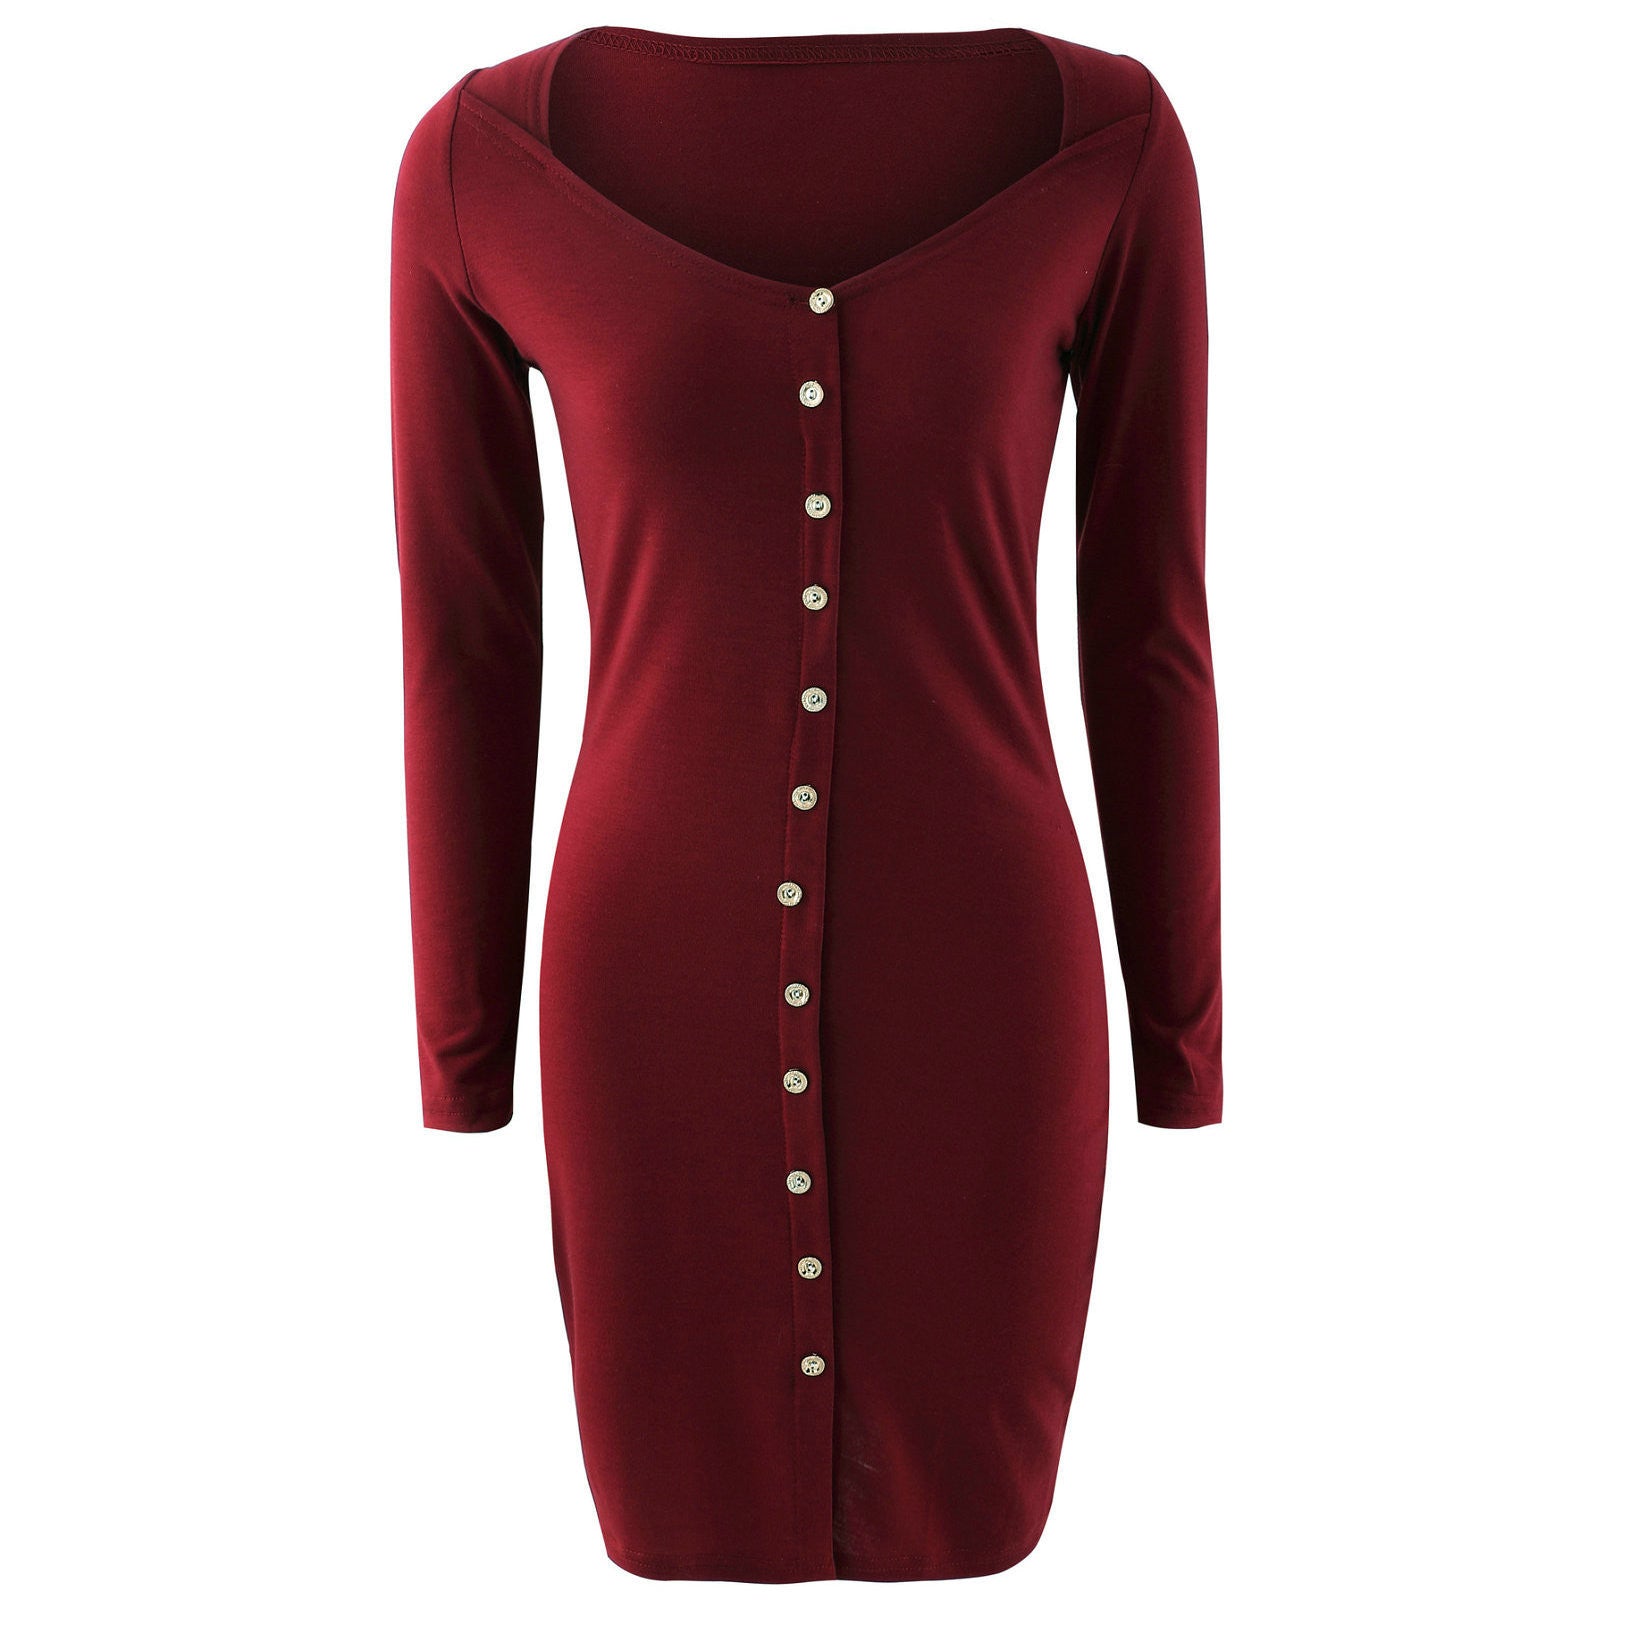 Sexy Front Button Square Neck Short Bodycon Dress - Oh Yours Fashion - 3